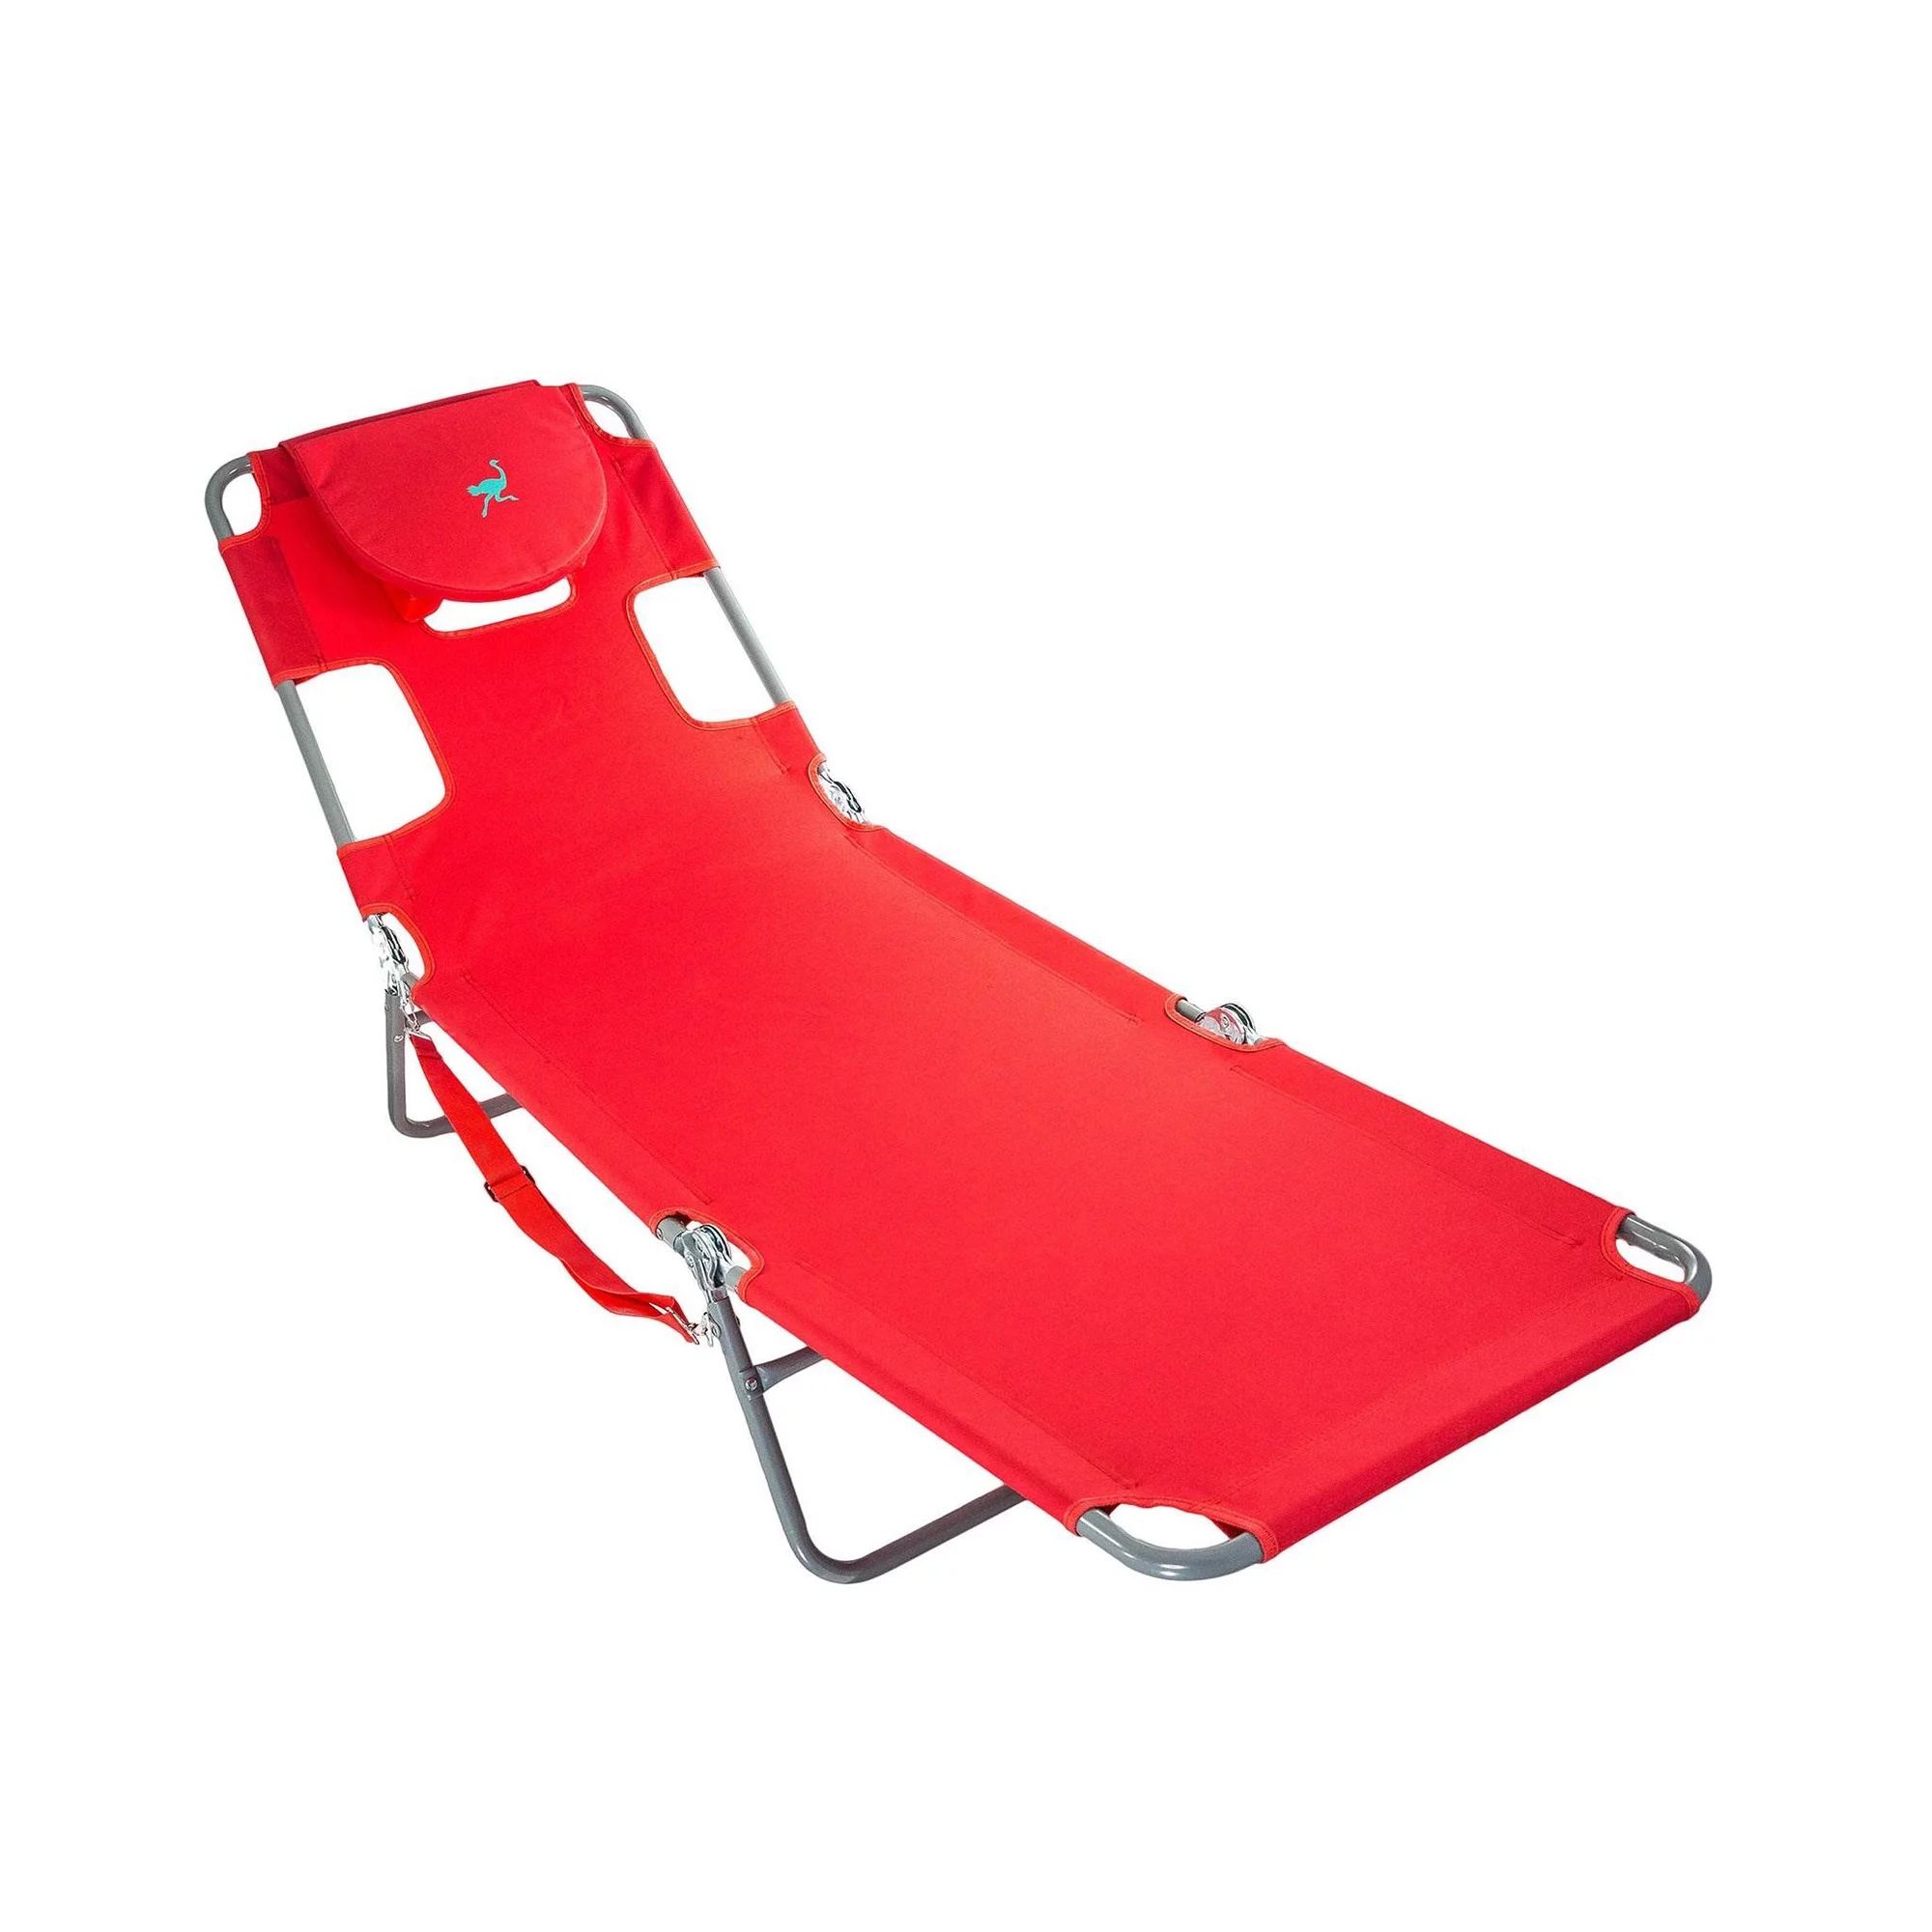 Ostrich Chaise Lounge, Facedown Beach Camping Pool Tanning Chair, Red | Walmart (US)